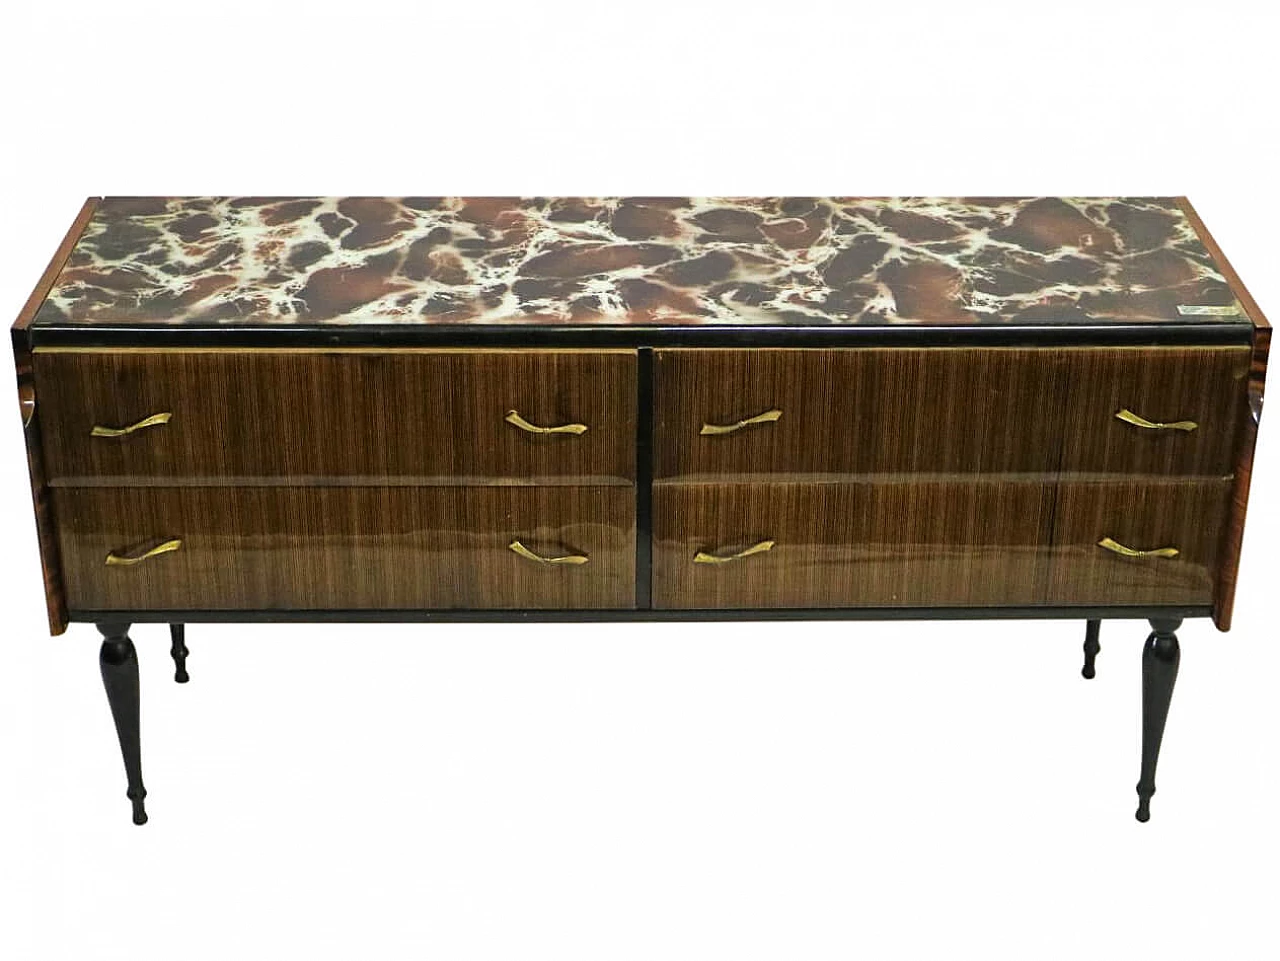 Dresser with Cristalmurano marble-effect glass top, 1950s 1479617